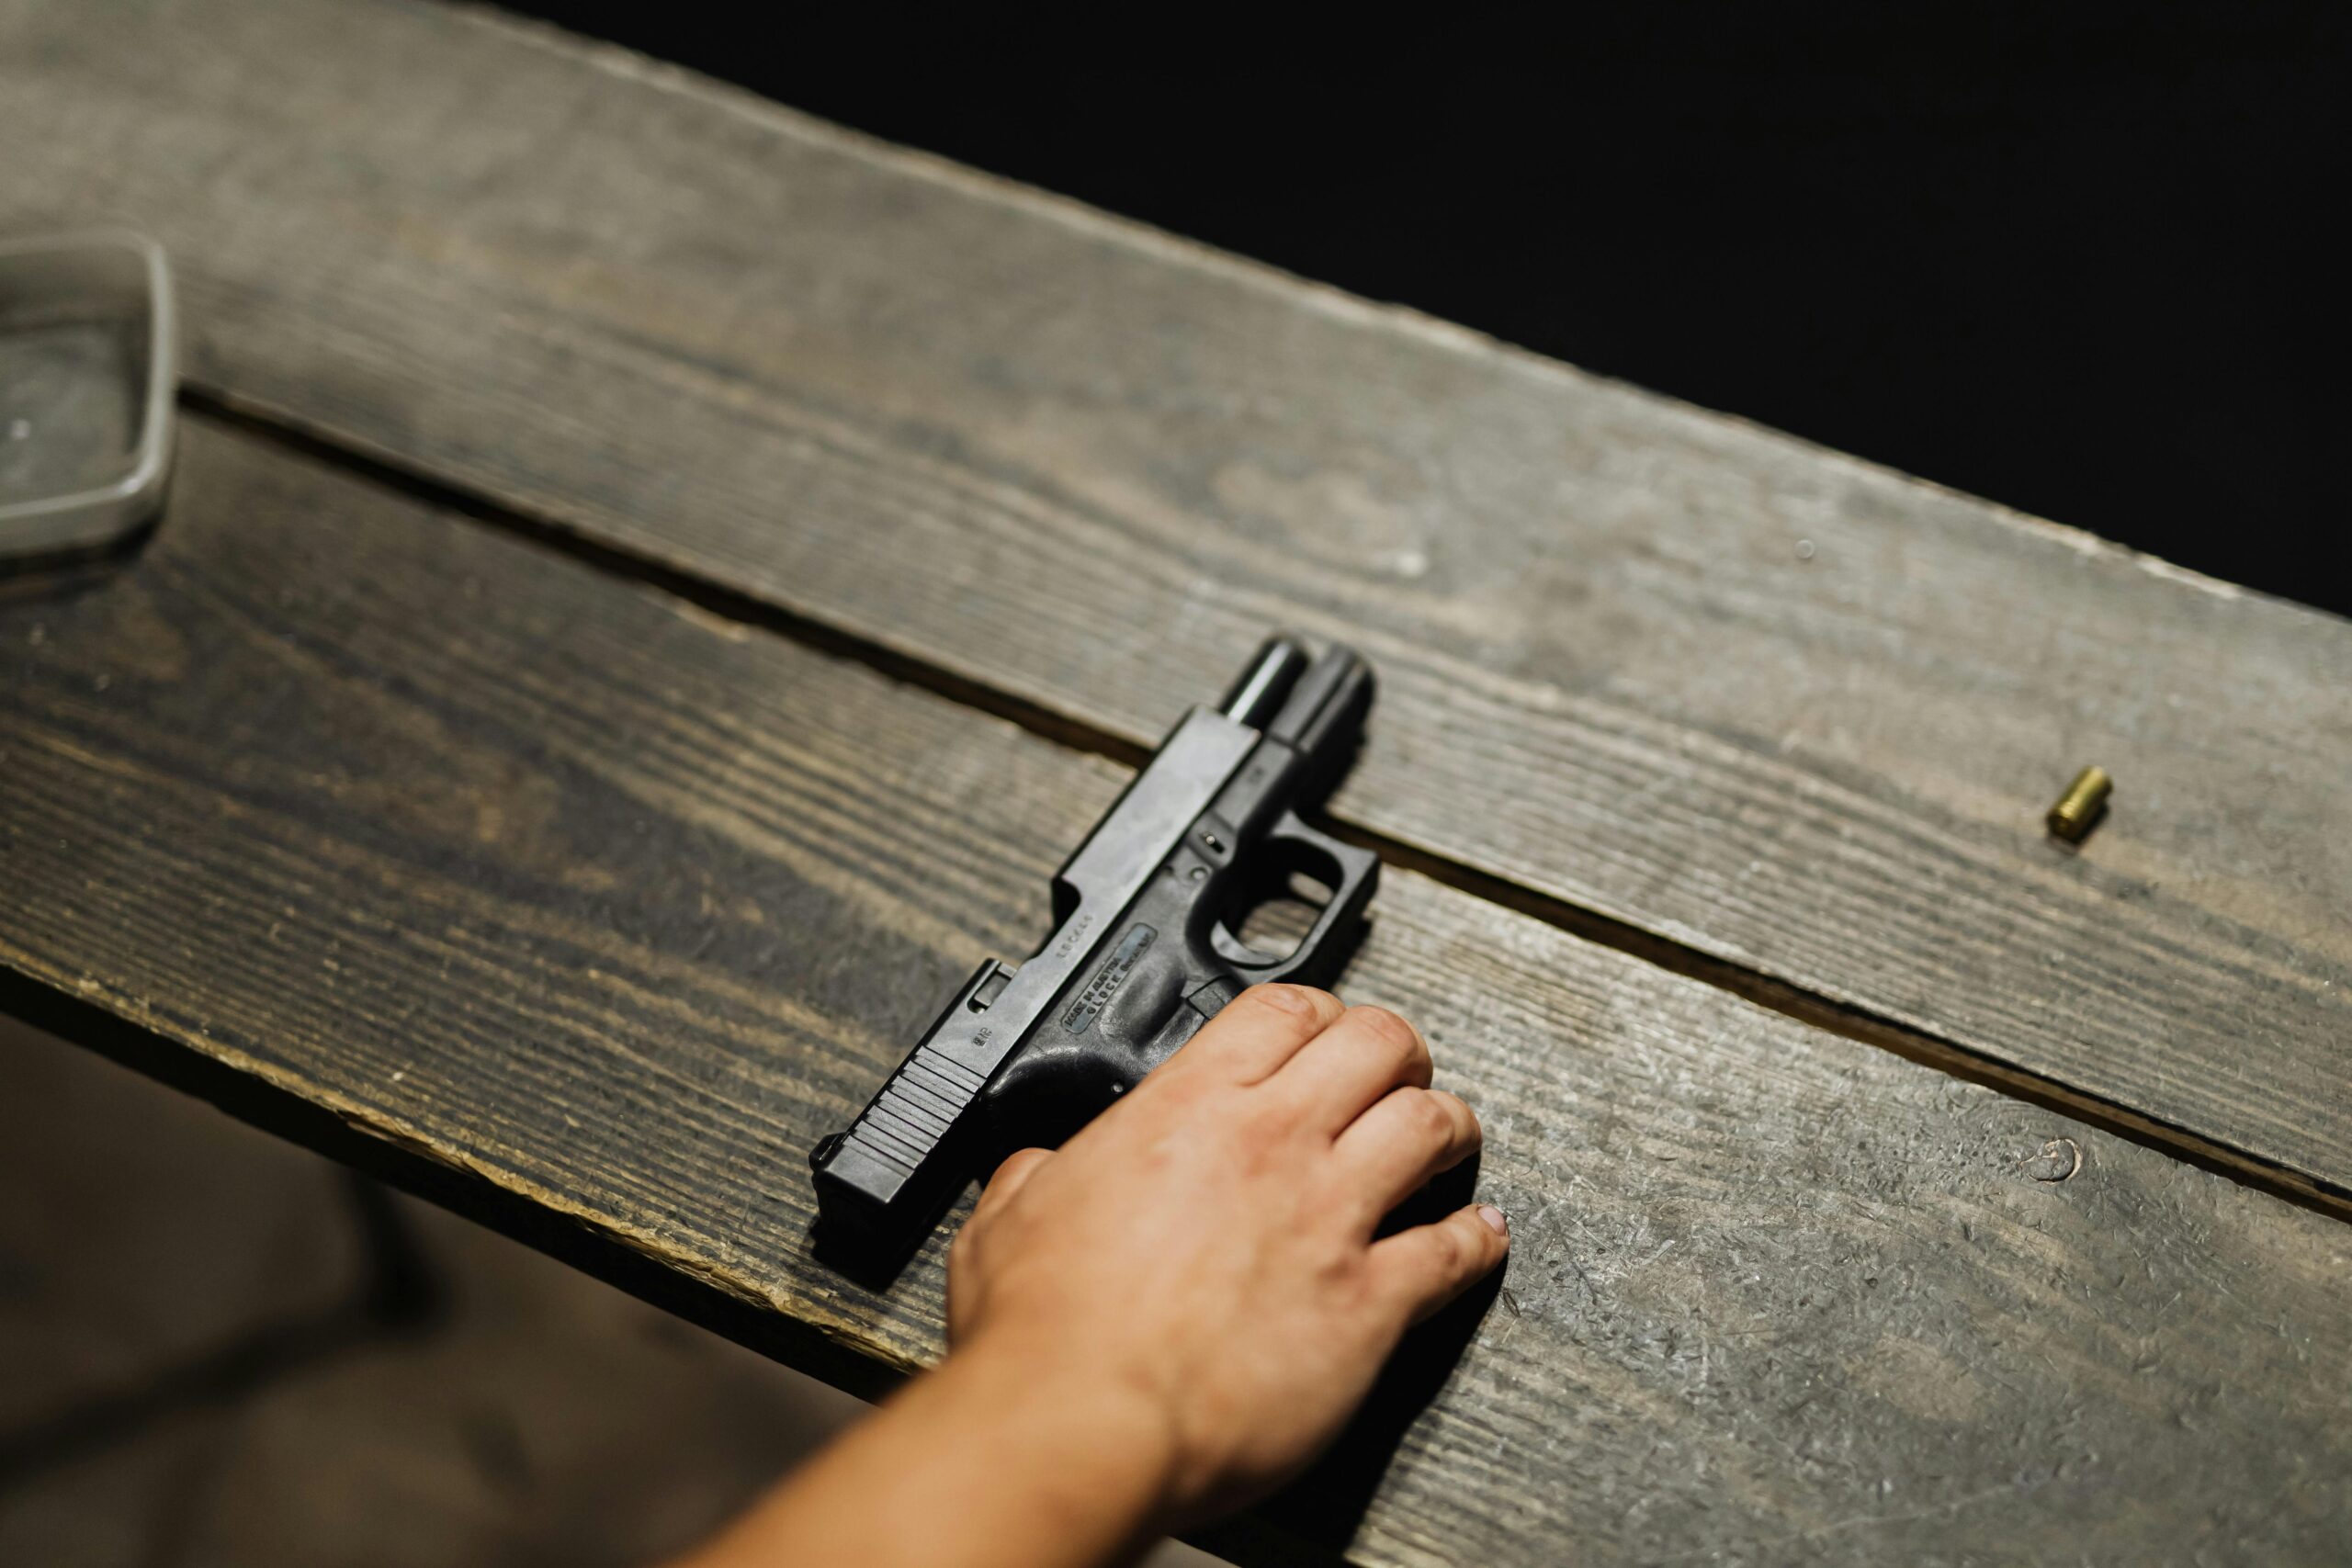 The Beginner's Guide to Starting a Handgun Collection - Essential Tips and Safety Practices